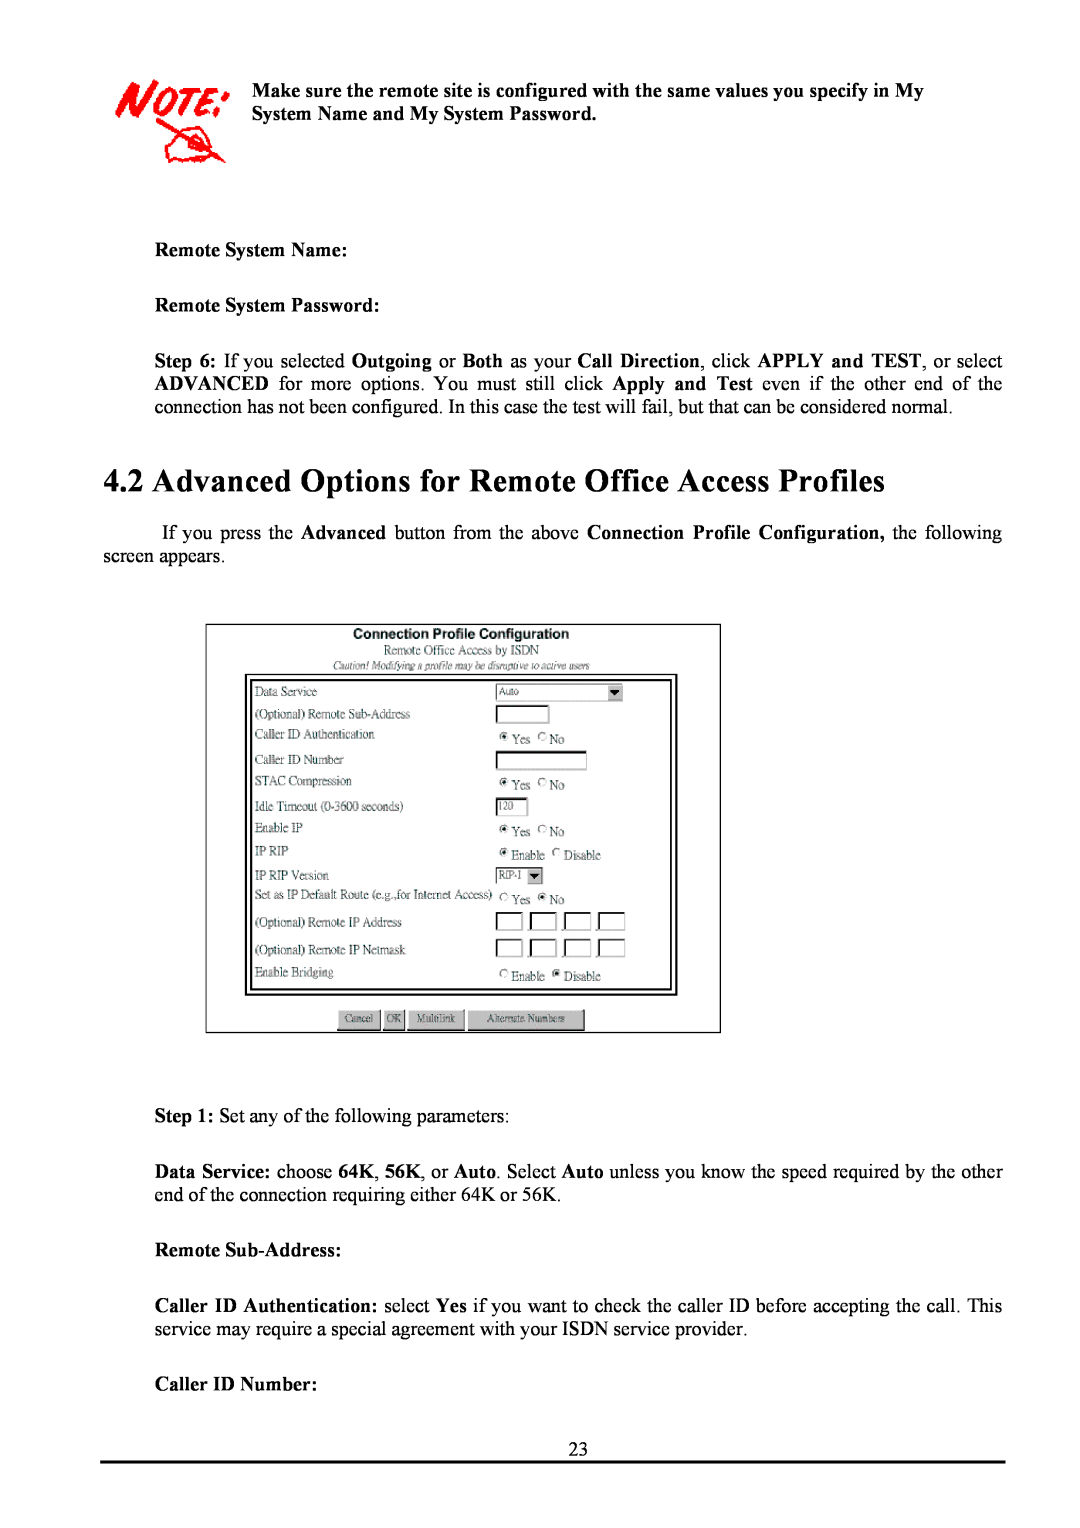 Atlantis Land ATLMMR MNE01 Advanced Options for Remote Office Access Profiles, Remote System Password, Remote Sub-Address 